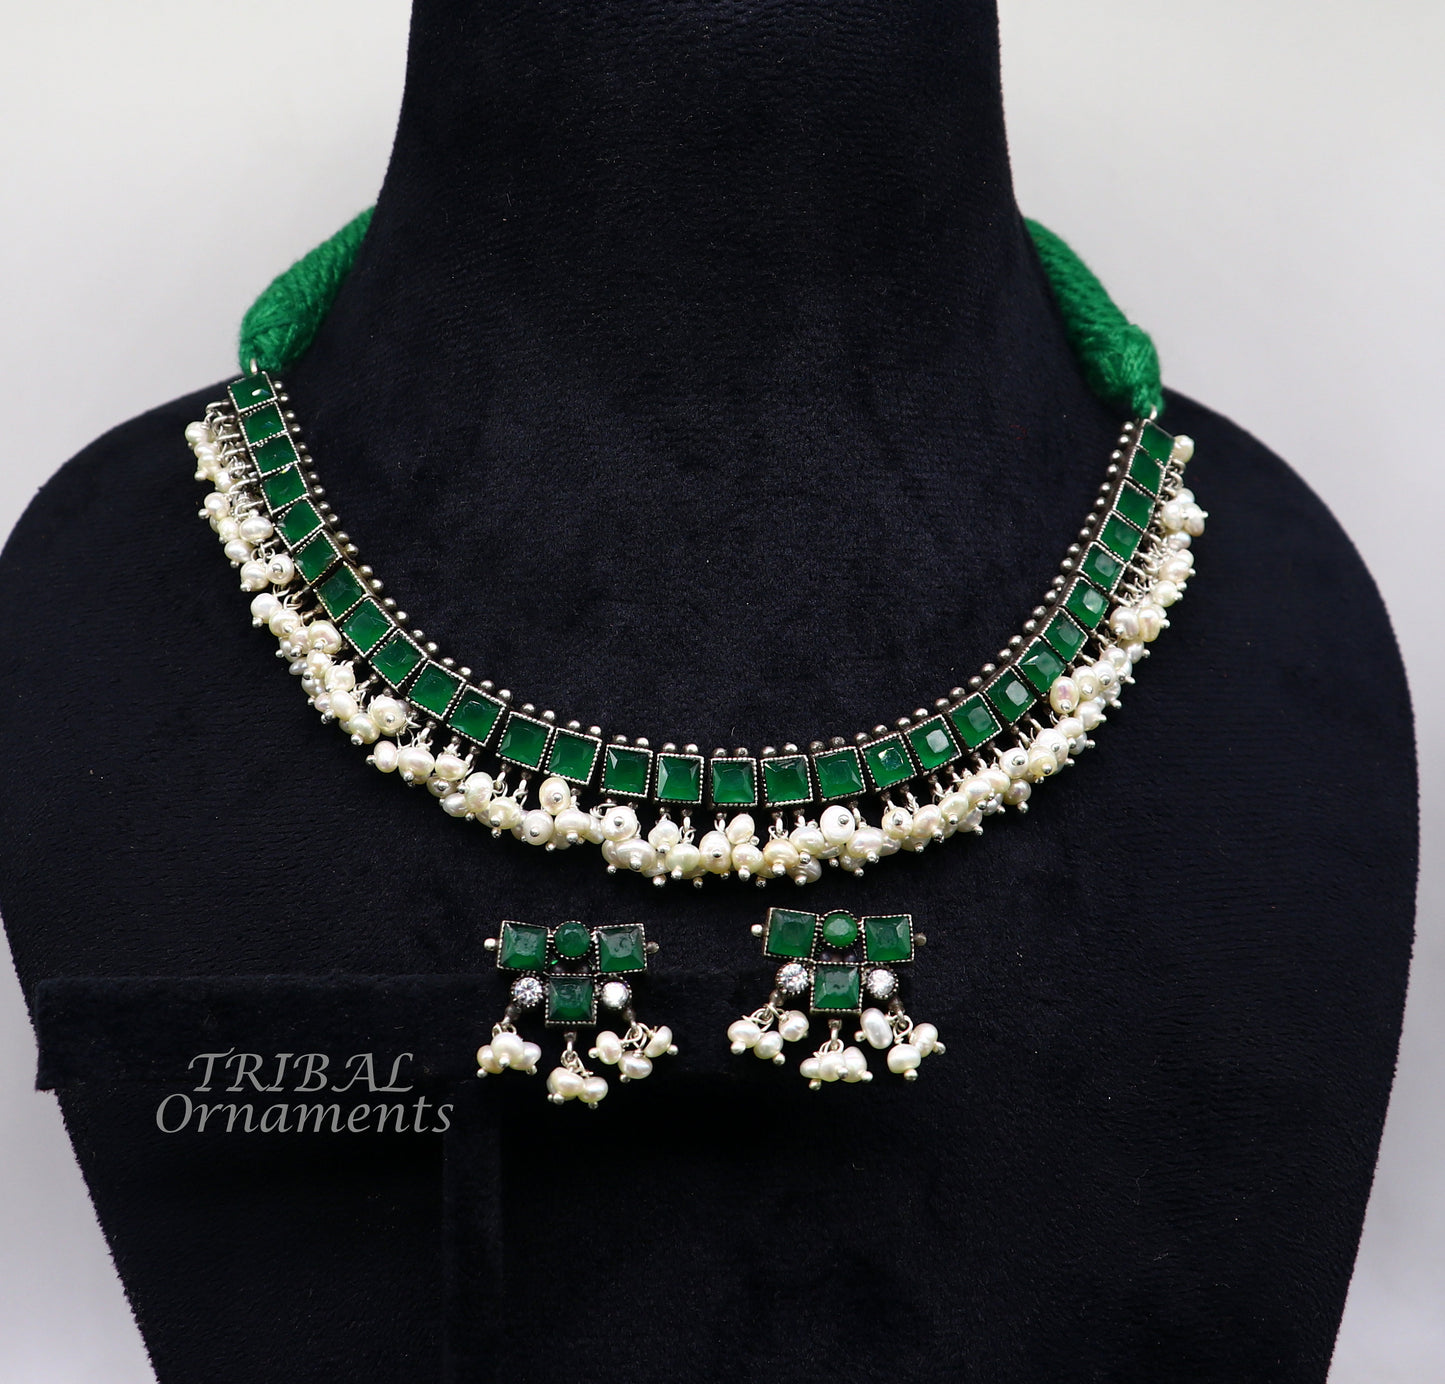 925 sterling silver customized guttapusalu necklace set amazing green stone and hanging pearl ethnic tribal brides jewelry set512 - TRIBAL ORNAMENTS